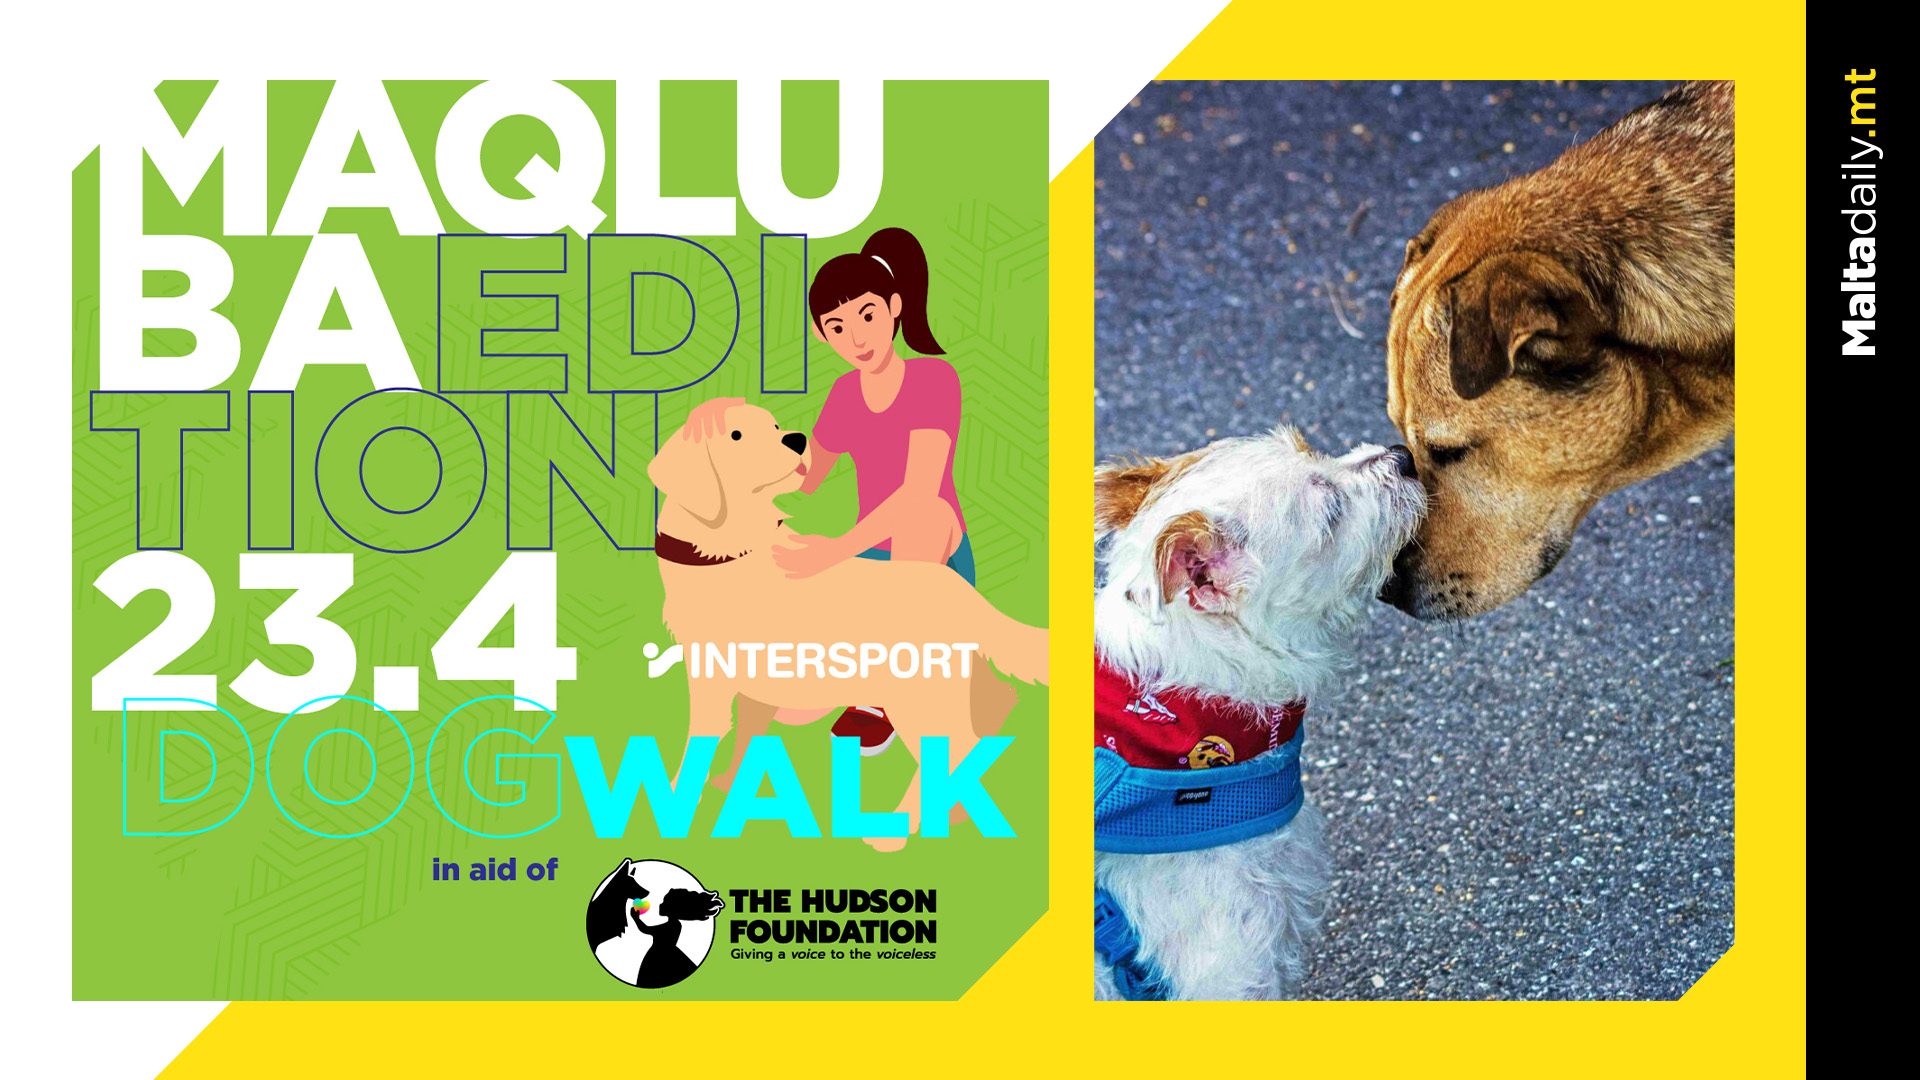 Intersport organising dog walk in aid of Hudson Foundation; all dogs get finishing medal